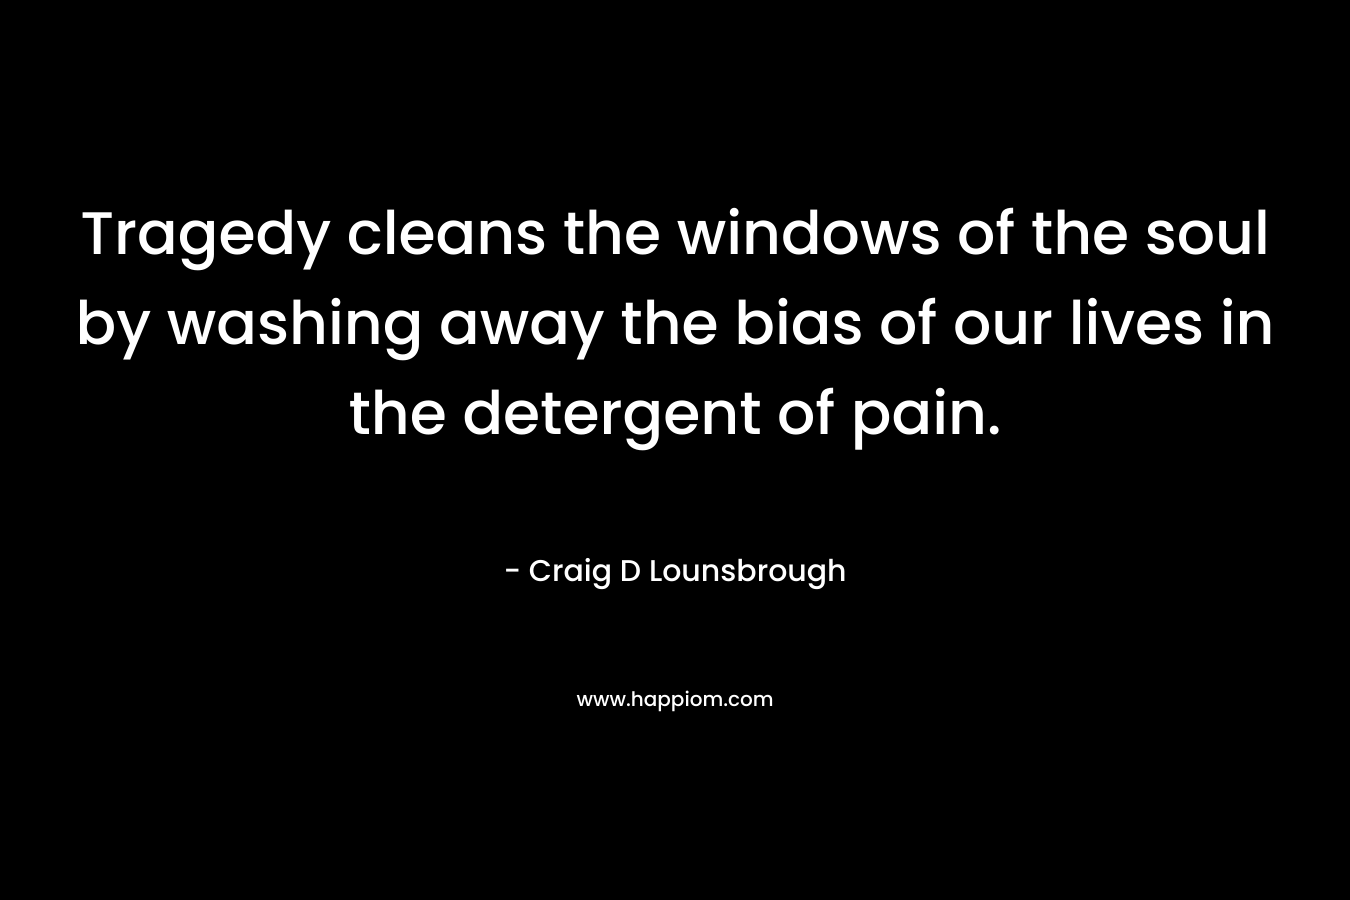 Tragedy cleans the windows of the soul by washing away the bias of our lives in the detergent of pain. – Craig D Lounsbrough